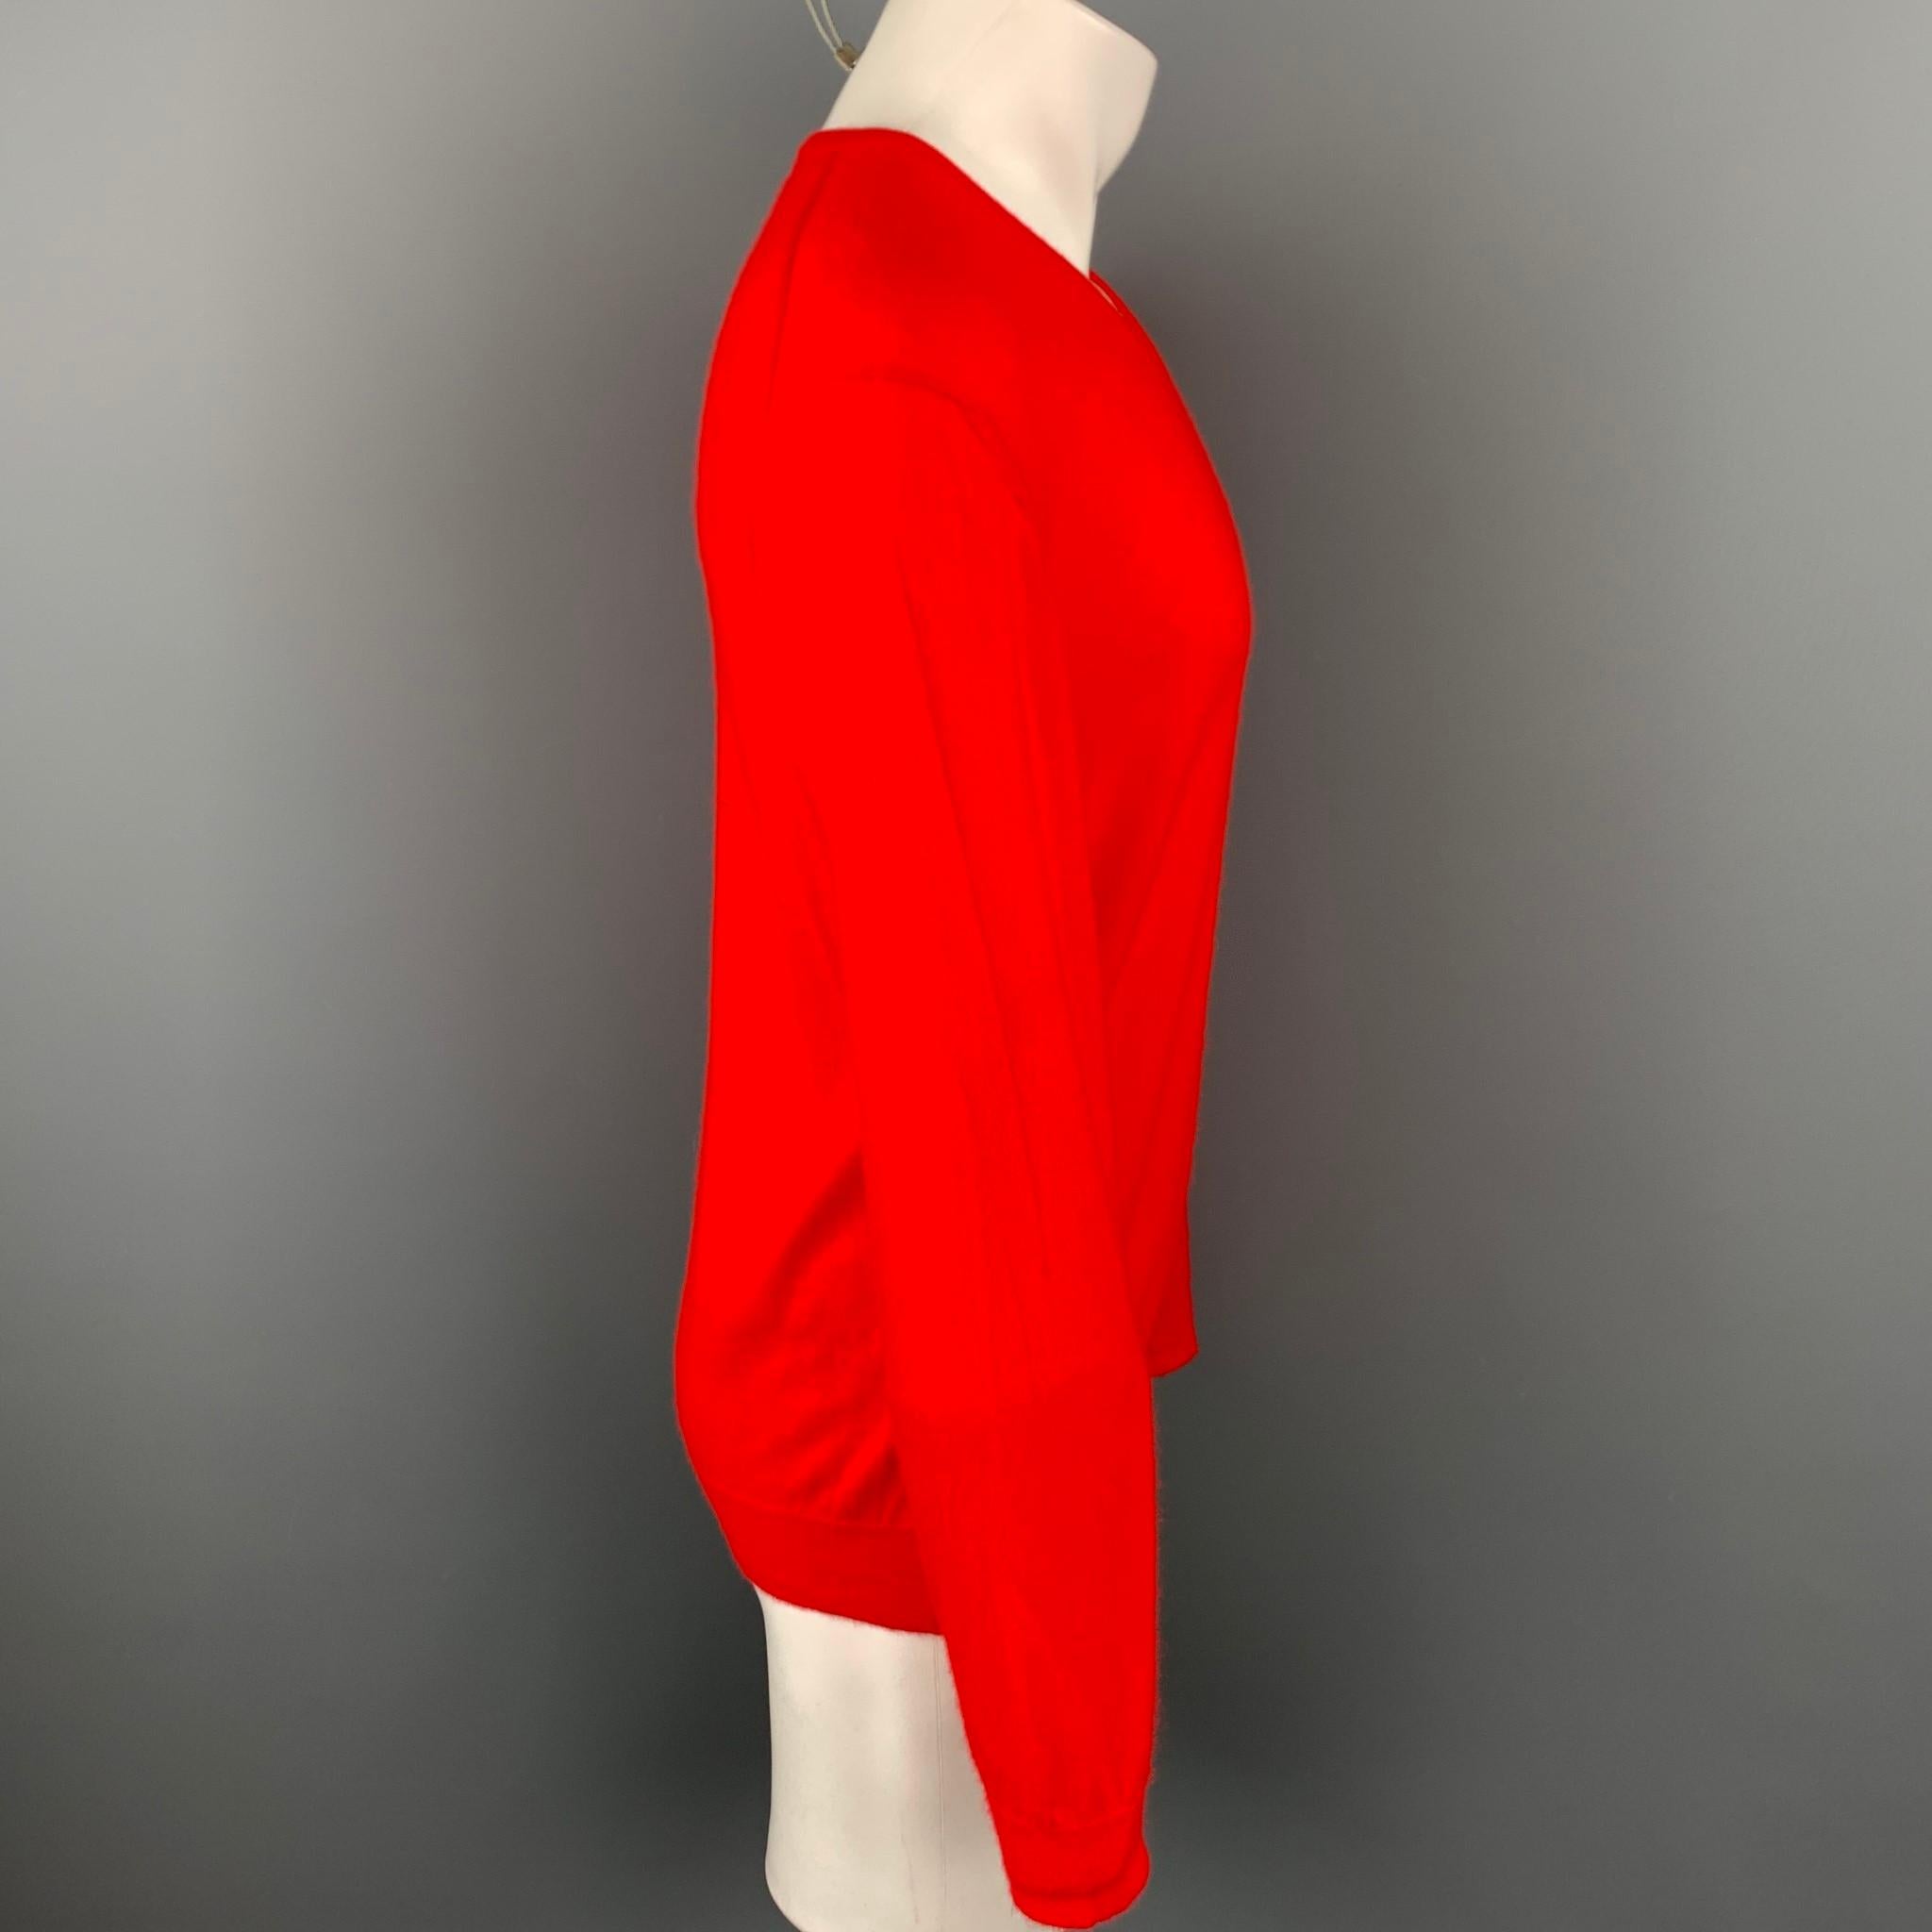 ERMENEGILDO ZEGNA sweater comes in a red cashmere featuring a v-neck. Minor wear. Made in Italy.

Very Good Pre-Owned Condition.
Marked: M/50

Measurements:

Shoulder: 18 in. 
Chest: 42 in. 
Sleeve: 27 in. 
Length: 27 in. 